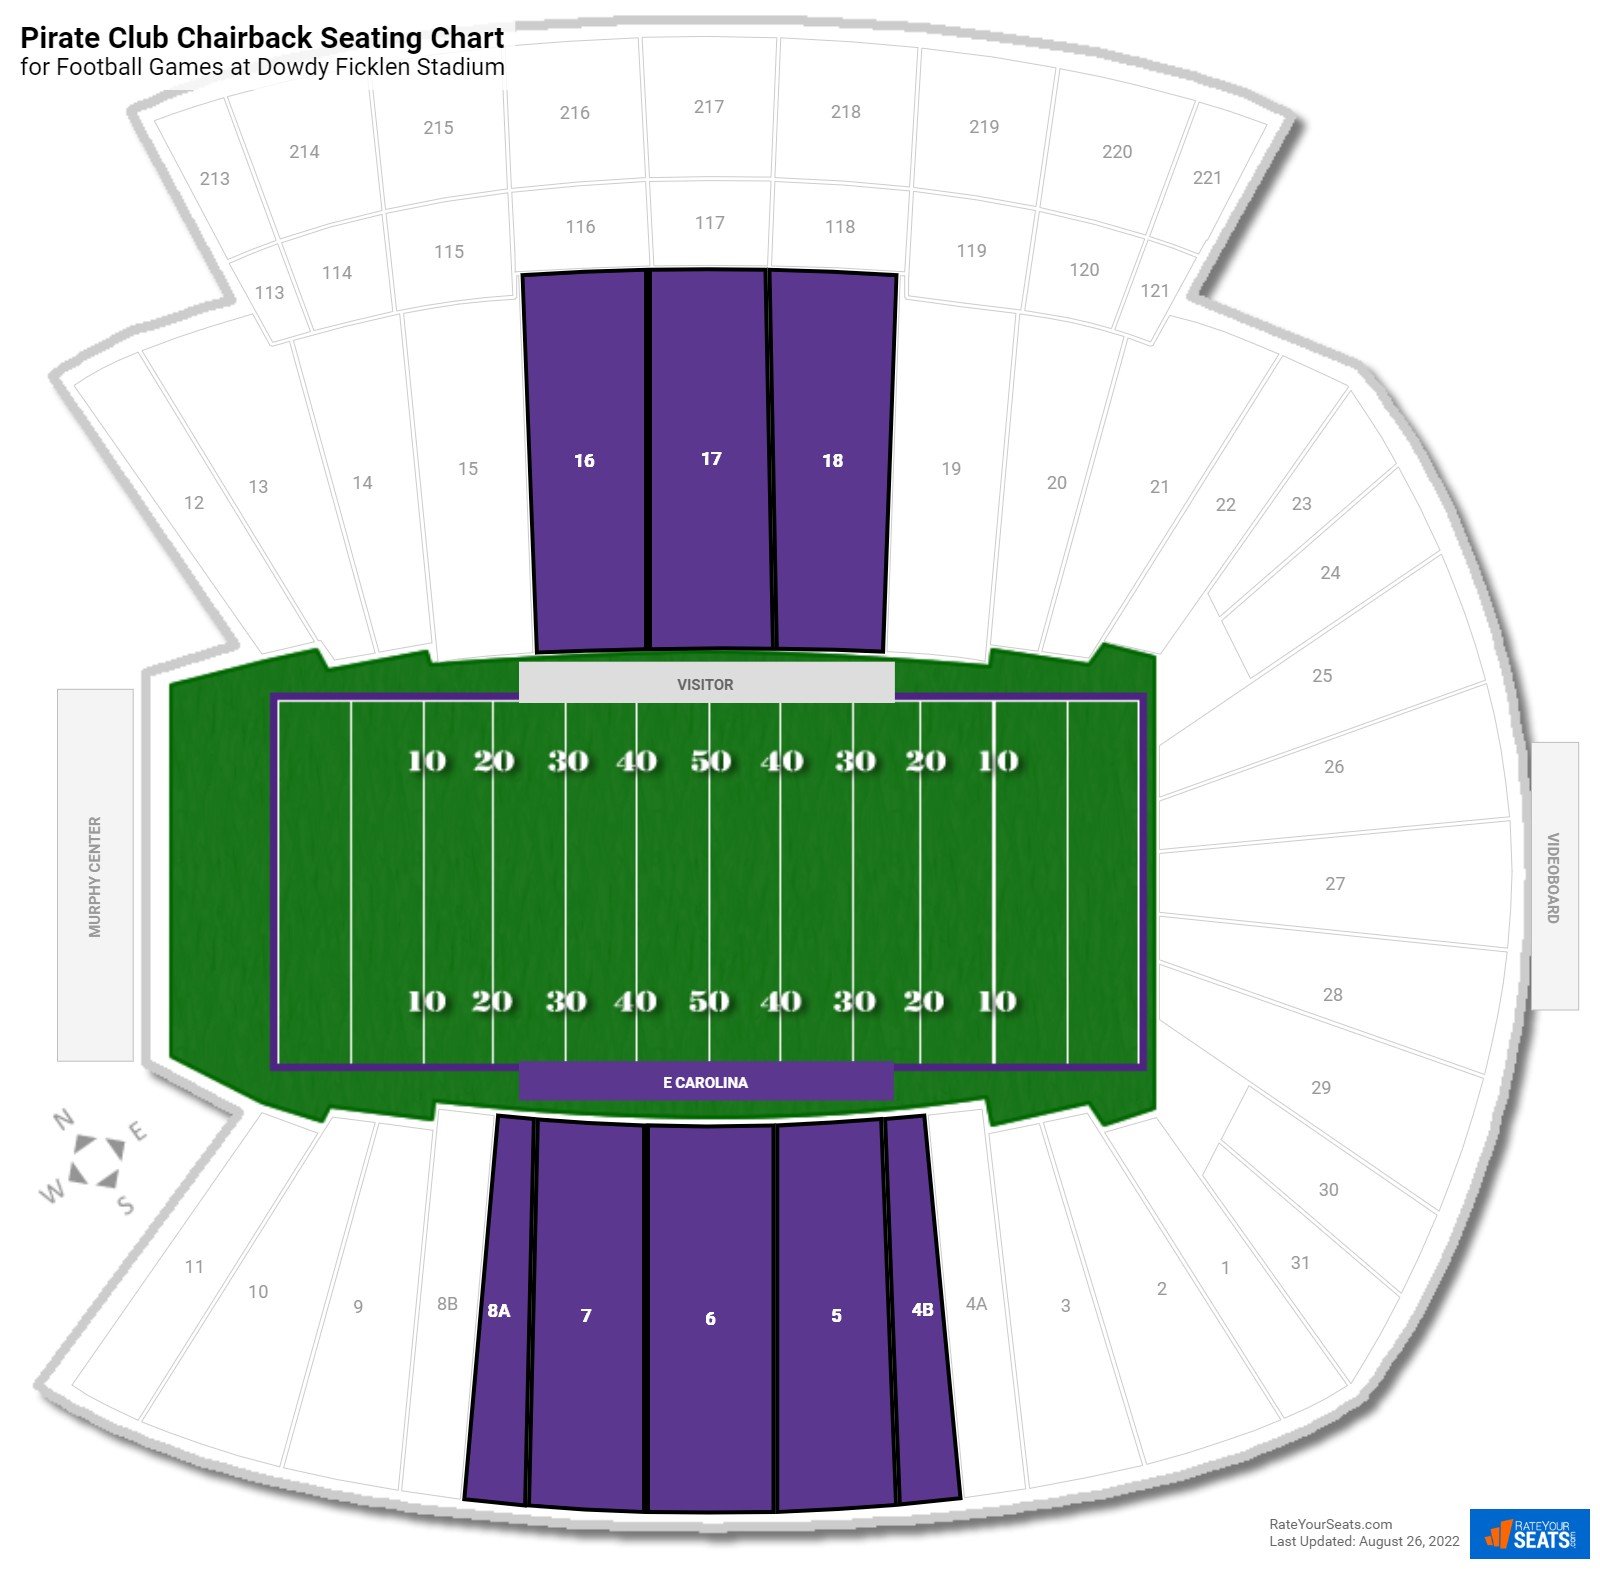 Football Pirate Club Chairback Seating Chart at Dowdy Ficklen Stadium